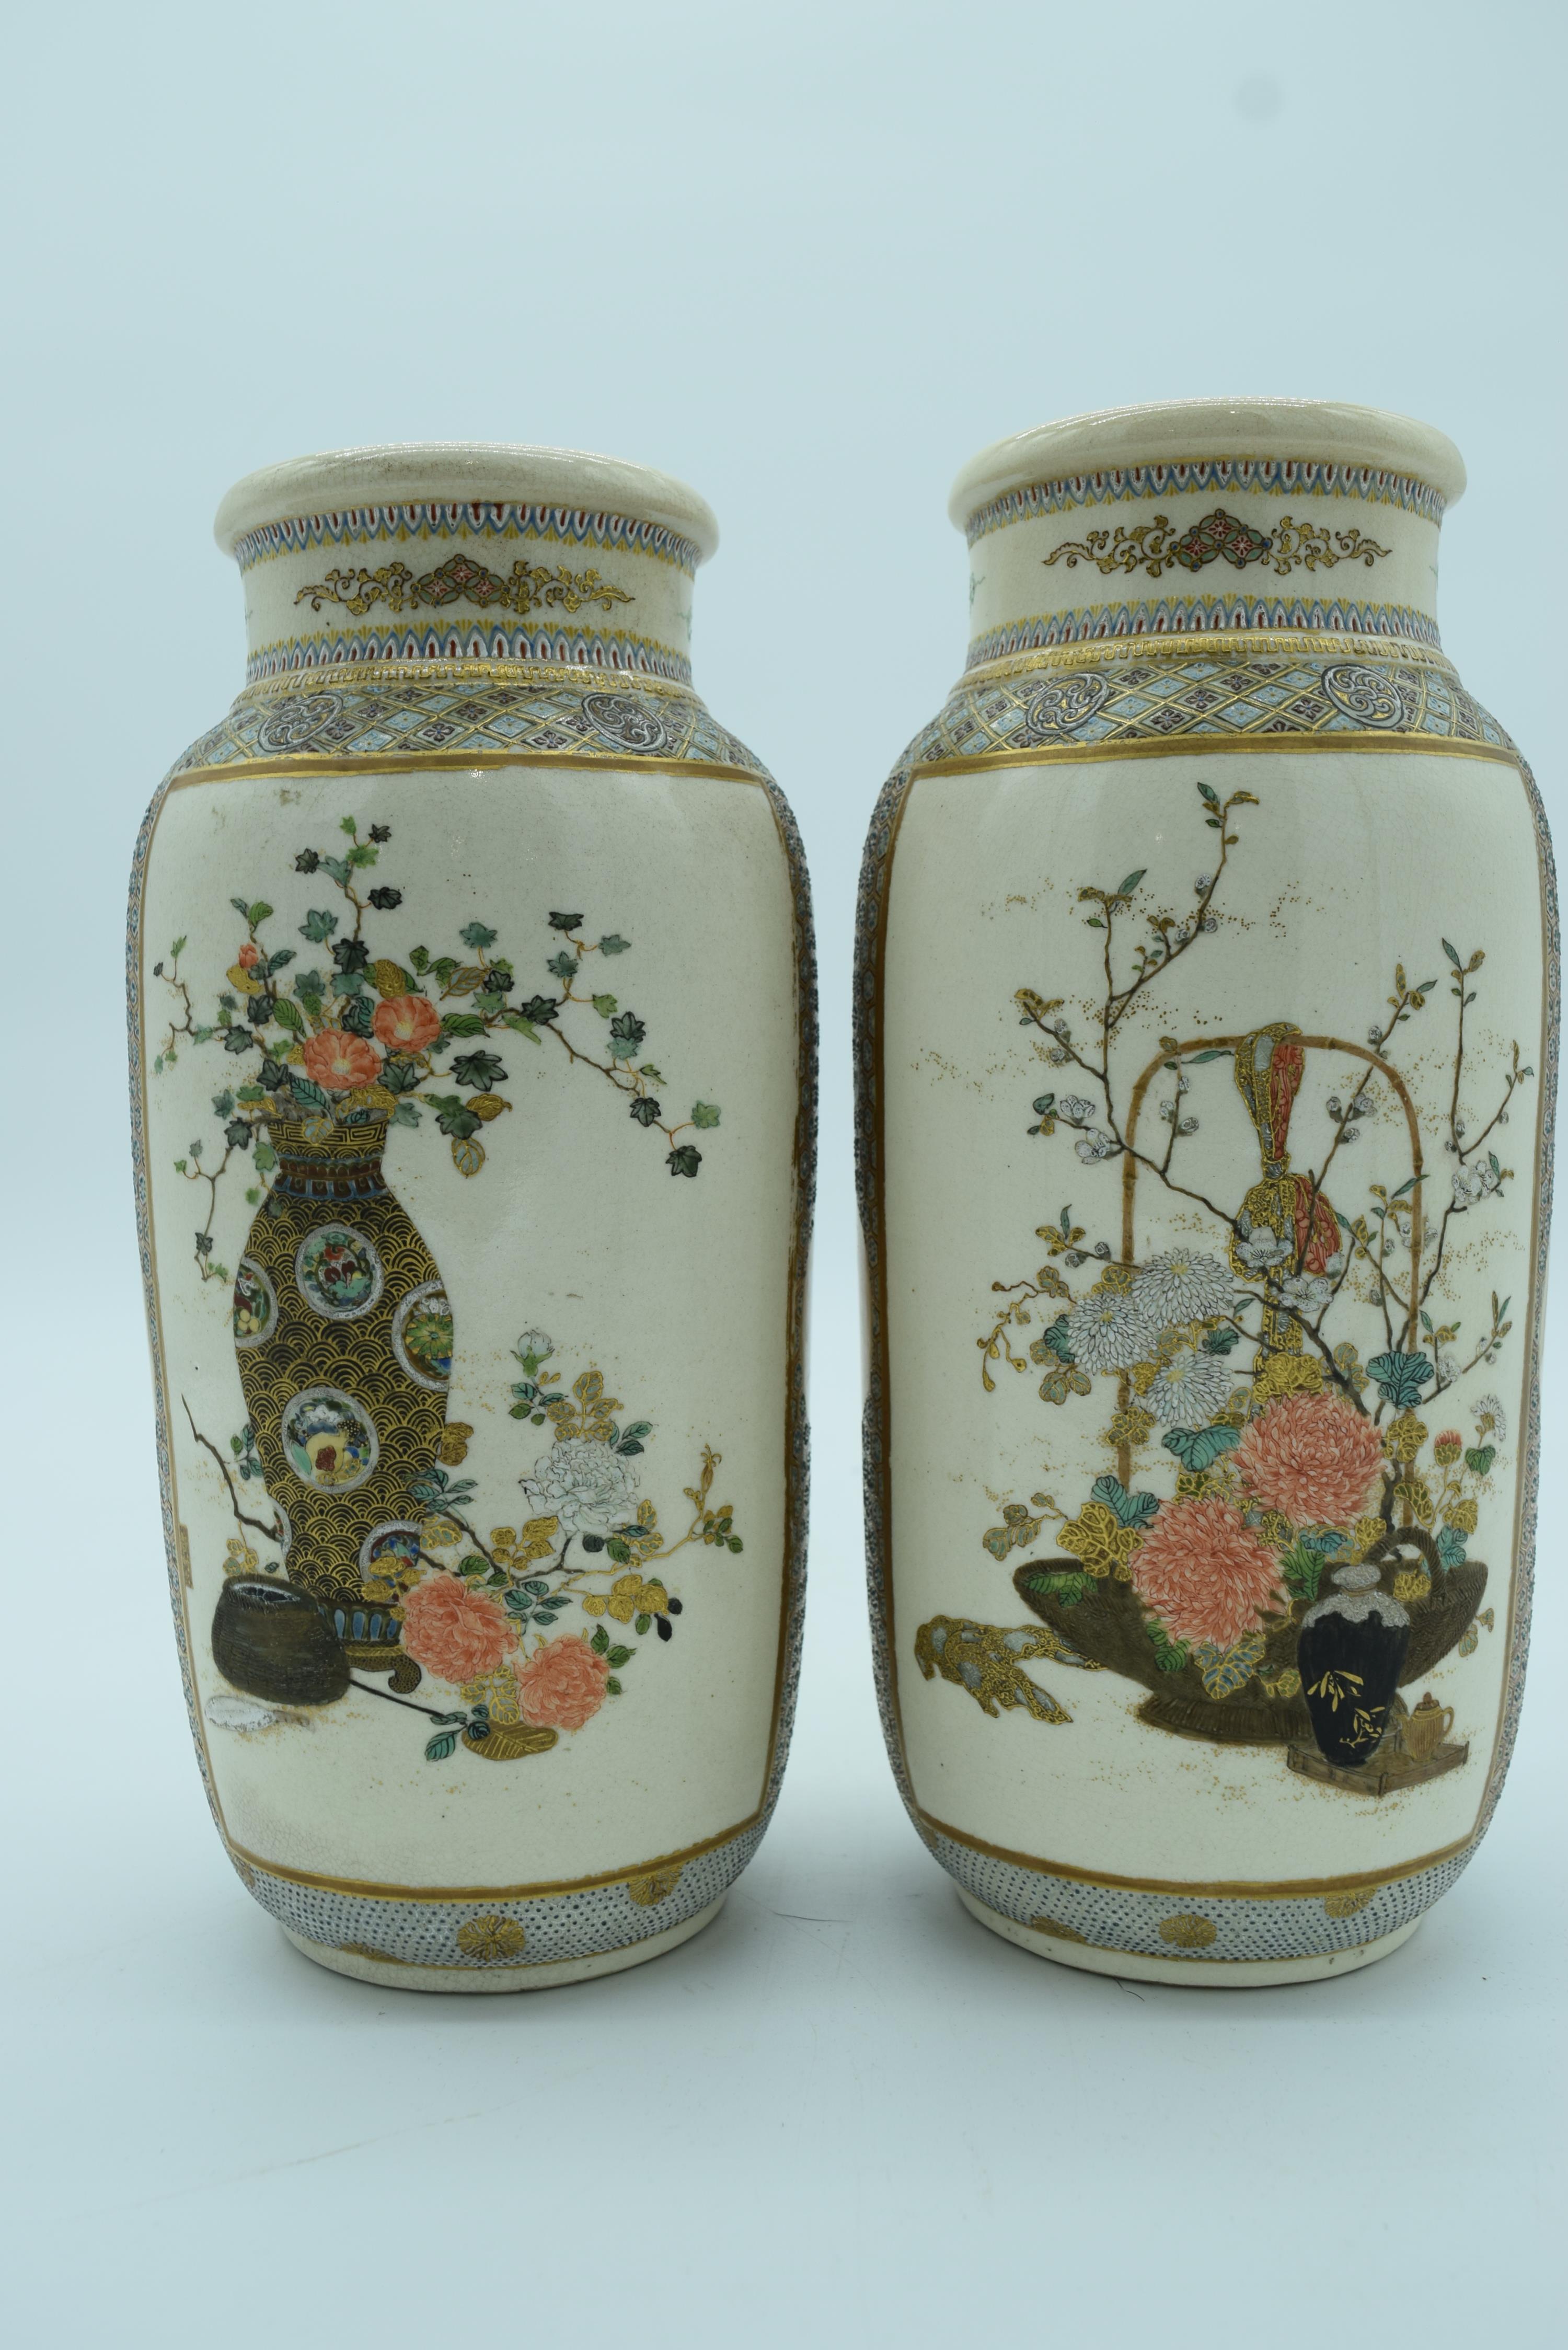 A PAIR OF 19TH CENTURY JAPANESE MEIJI PERIOD SATSUMA VASES painted with bonzai trees and high tables - Image 7 of 19